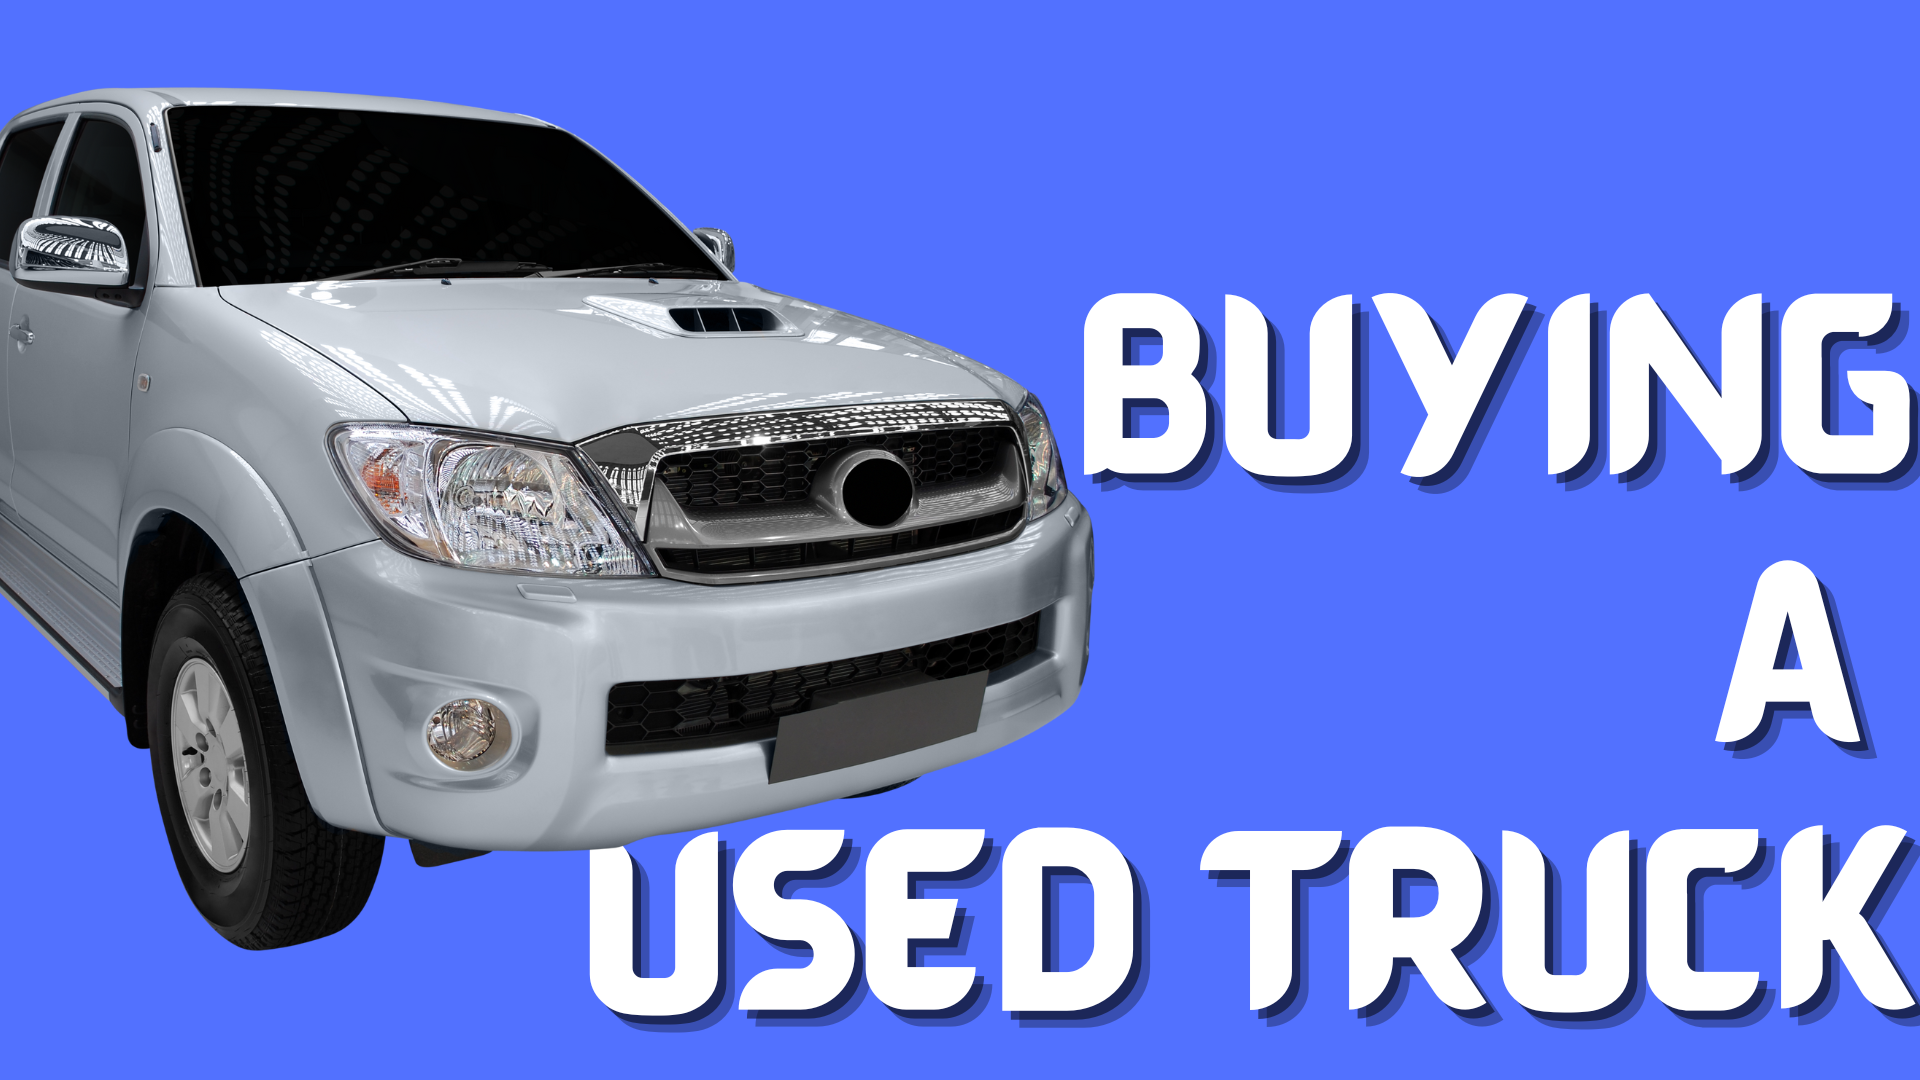 Choosing A Used Truck – Consideration For First-Time Truck Owners